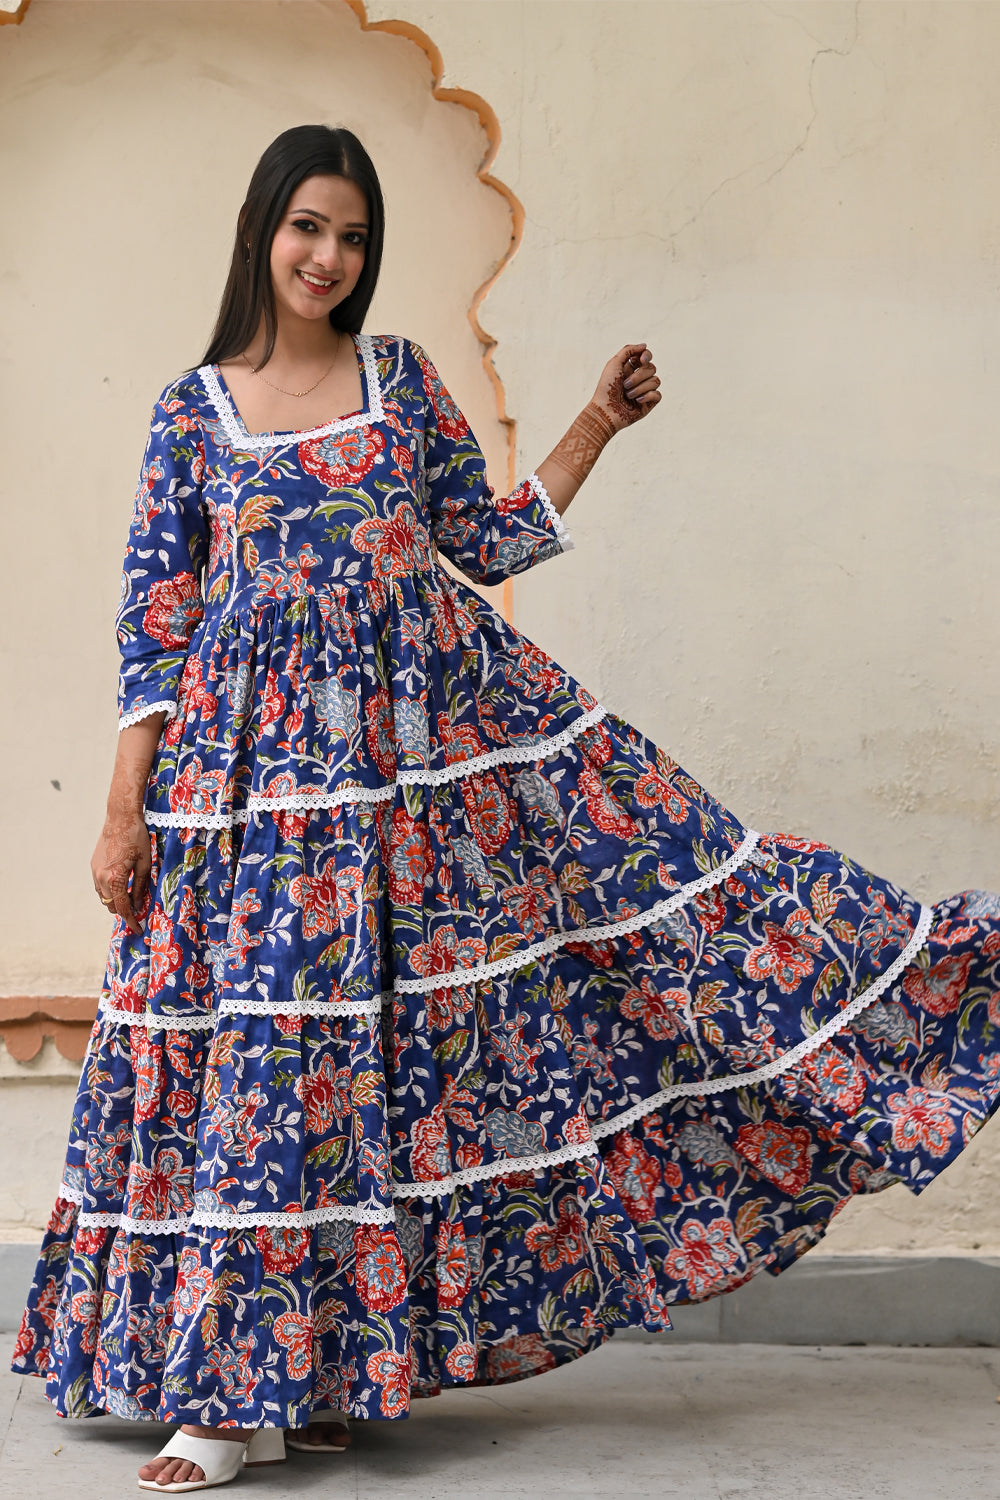 8 Meter Flare Mediterranean Blue Tiered Long Dress For Women | Custom Gowns | Made to Order